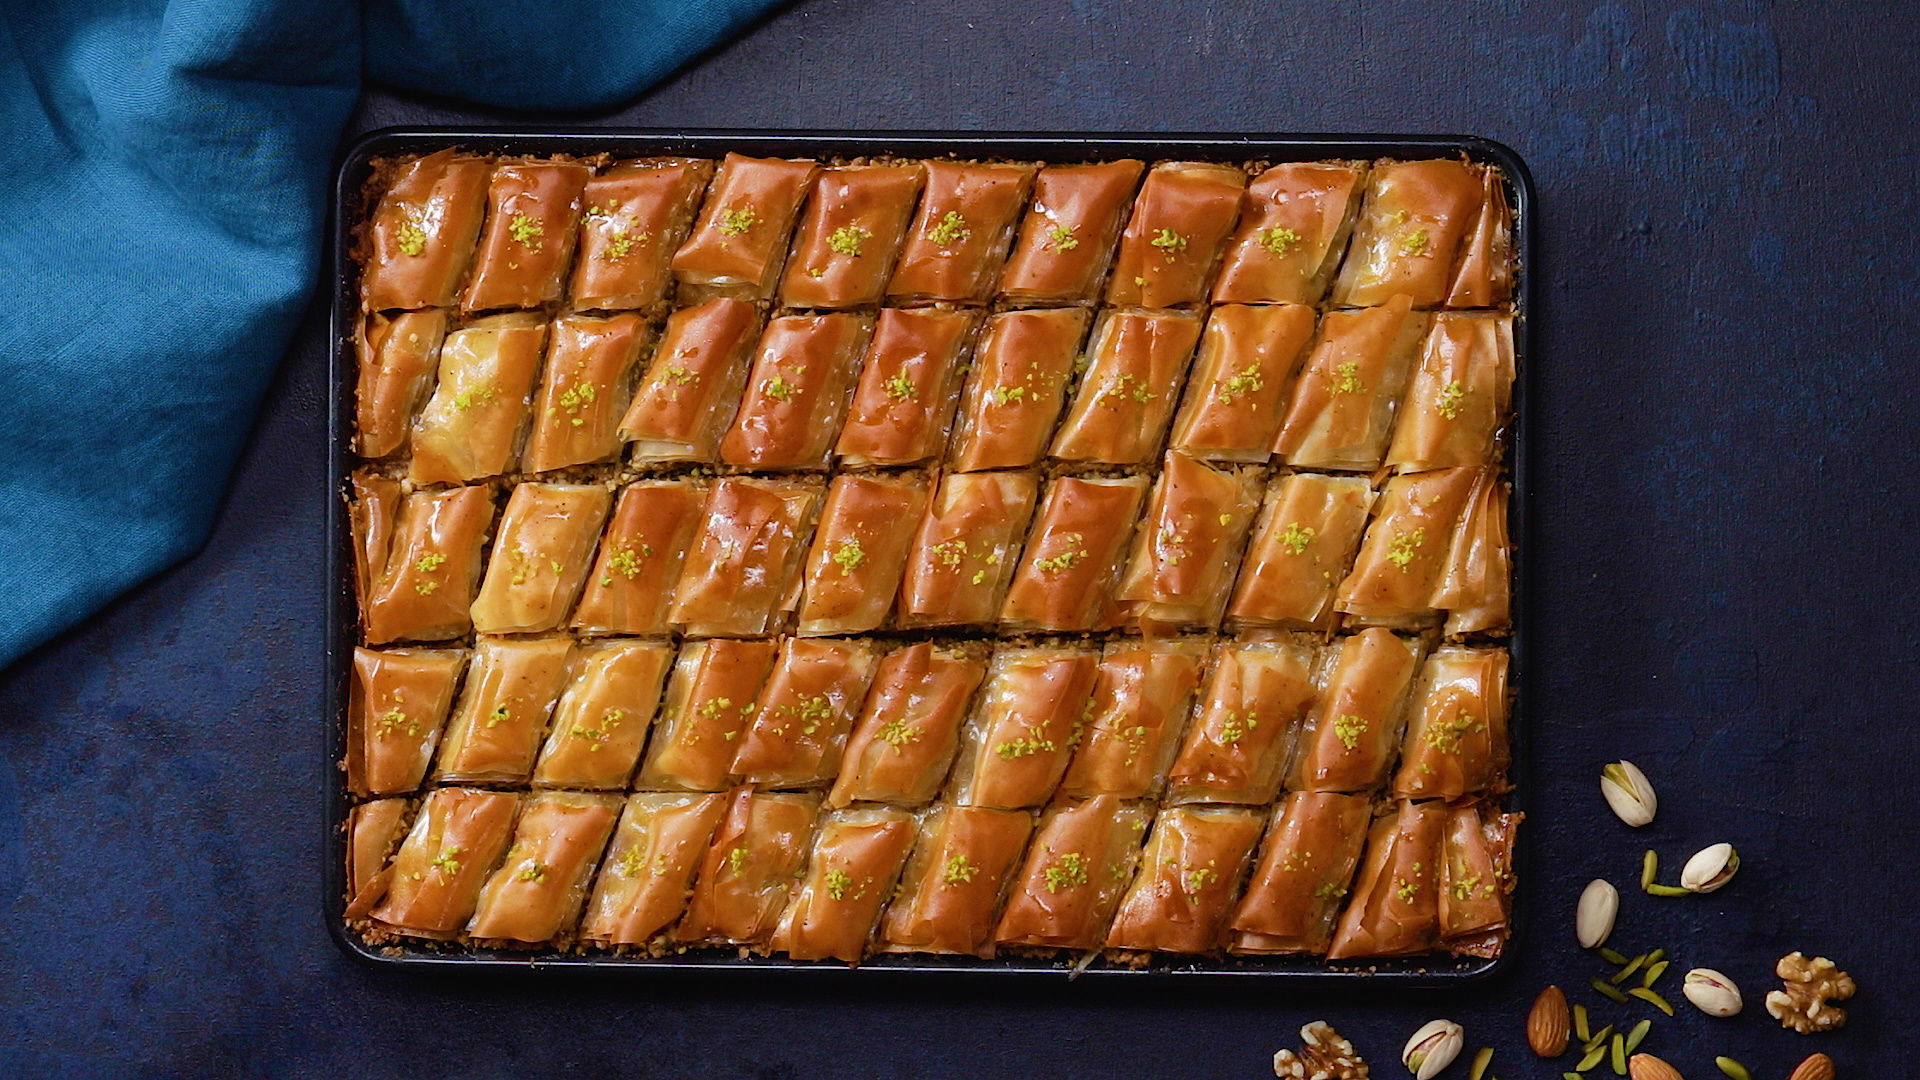 Baklava: The layers of phyllo pastry must be rolled out thinly, Cooking. 1920x1080 Full HD Background.